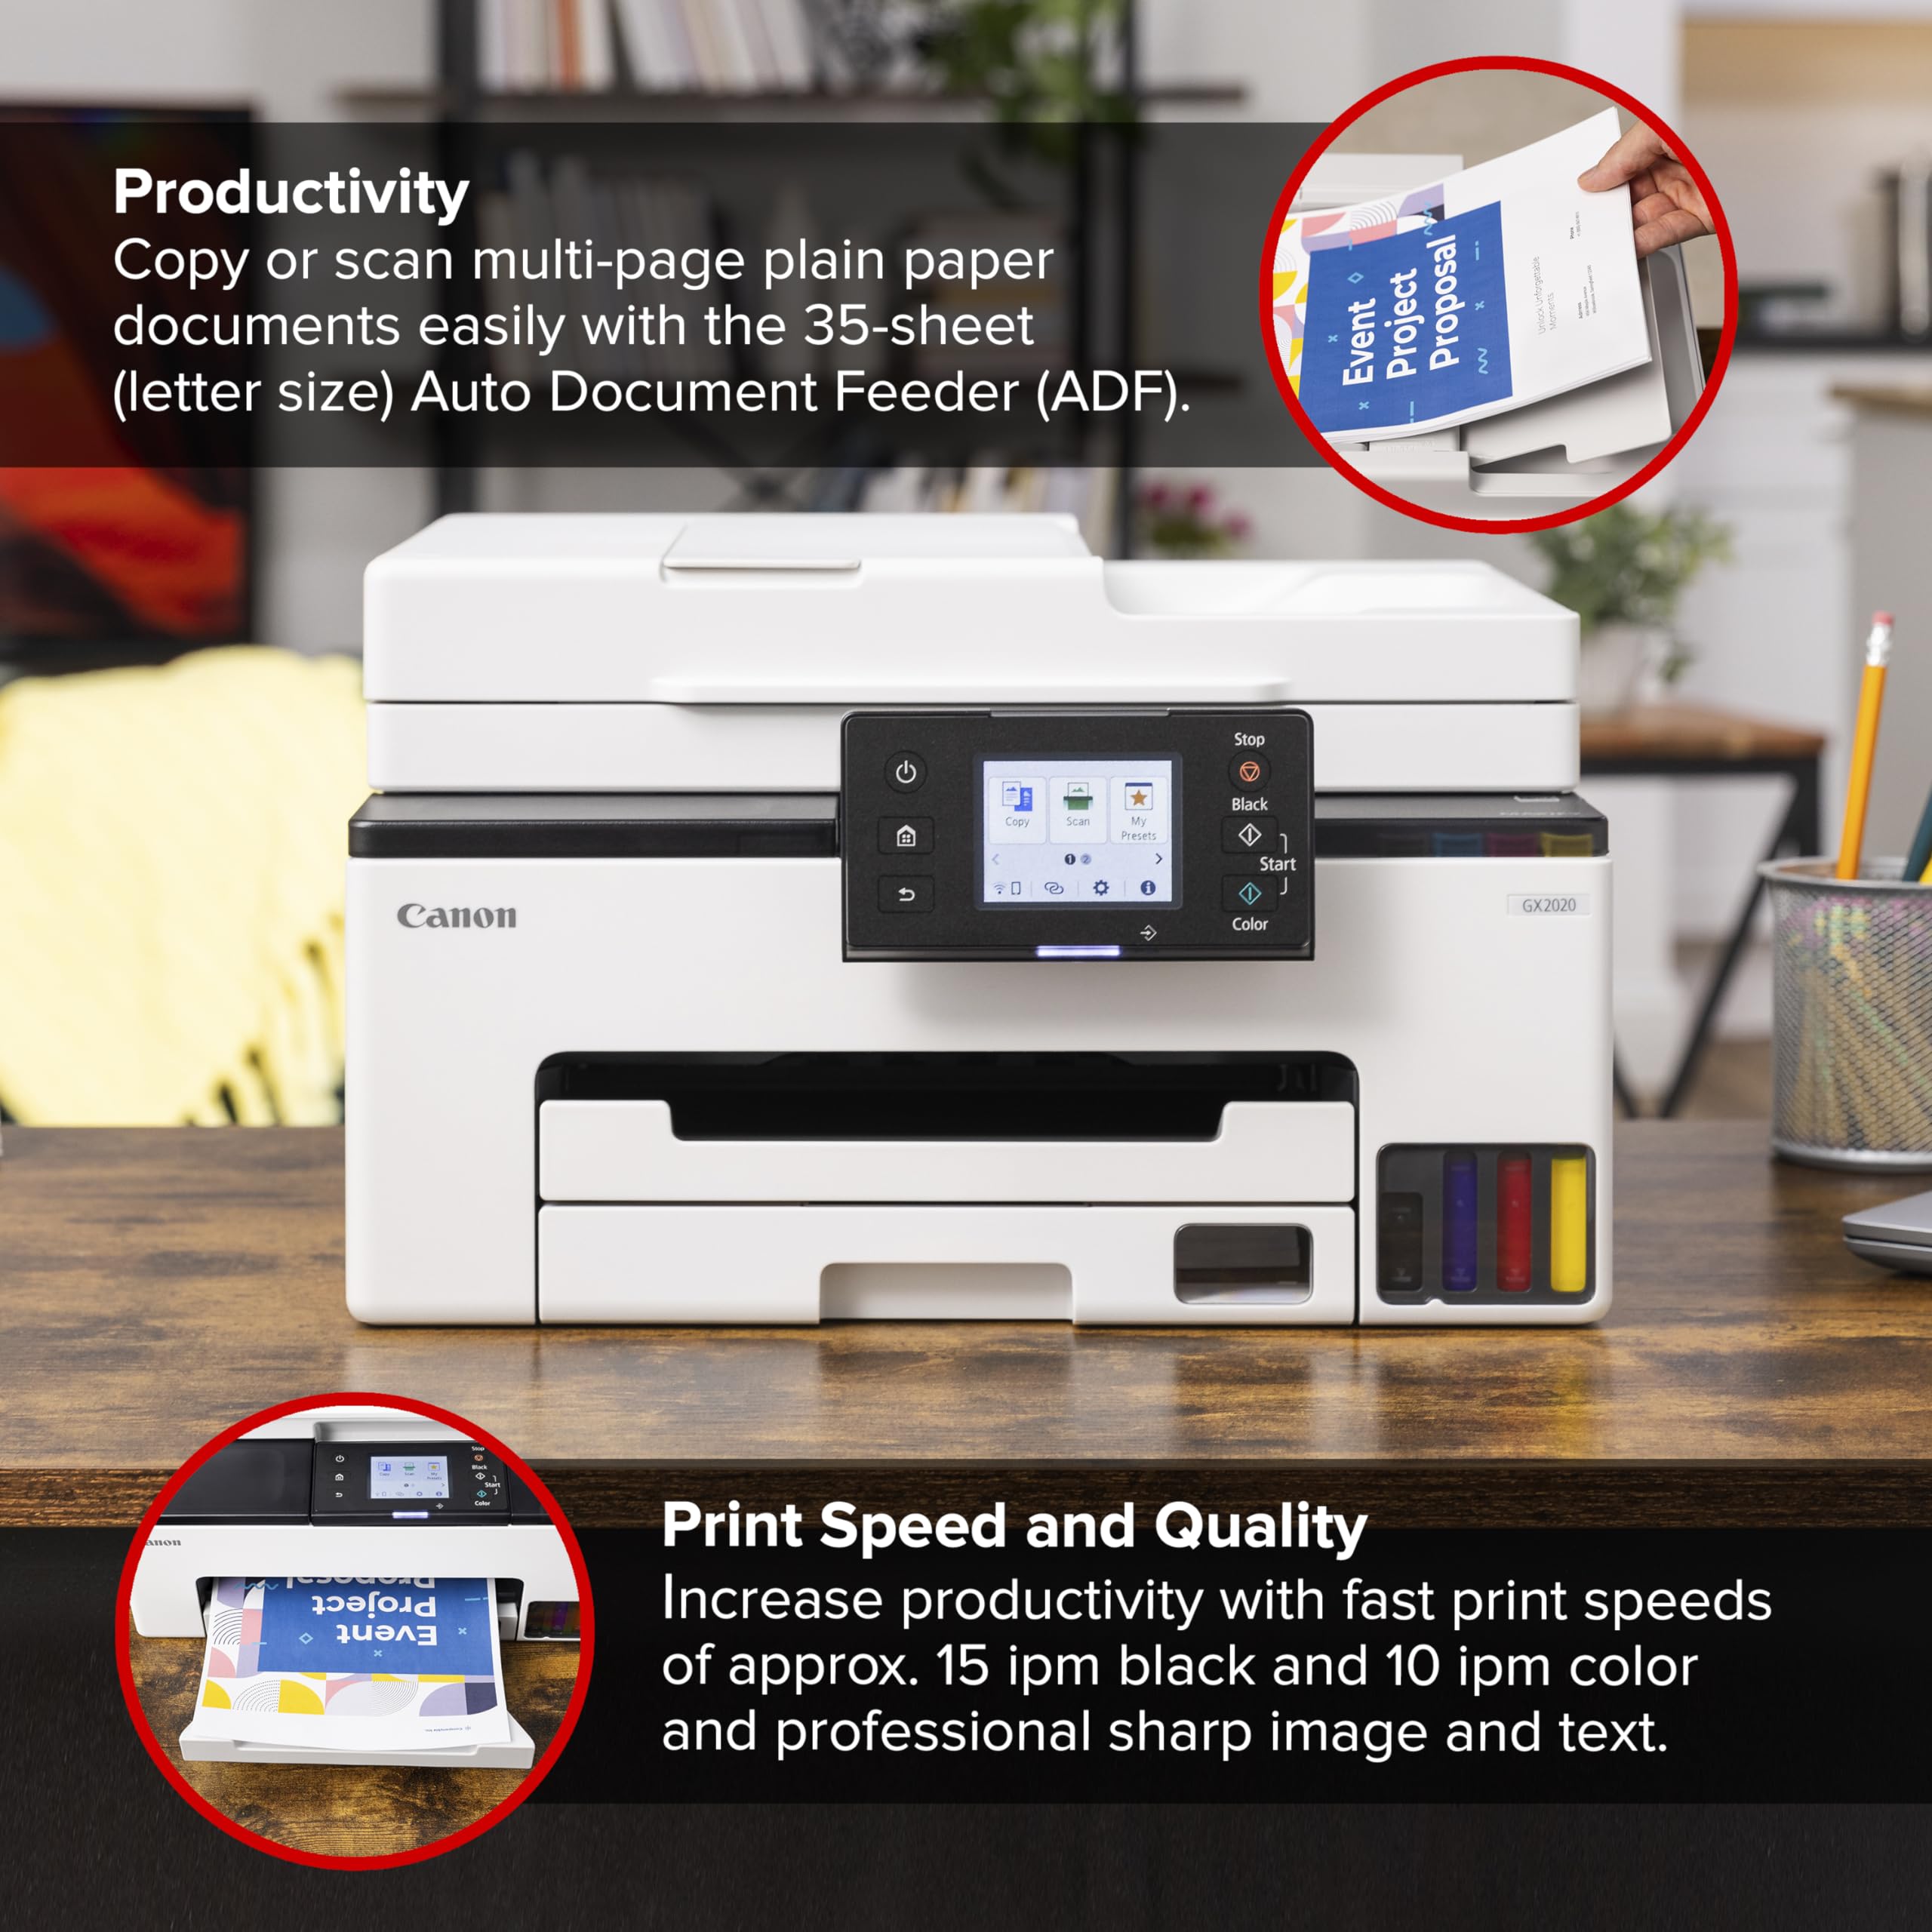 Canon MAXIFY GX2020 – Wireless Home and Office All-in-One Printer with MegaTank Technology